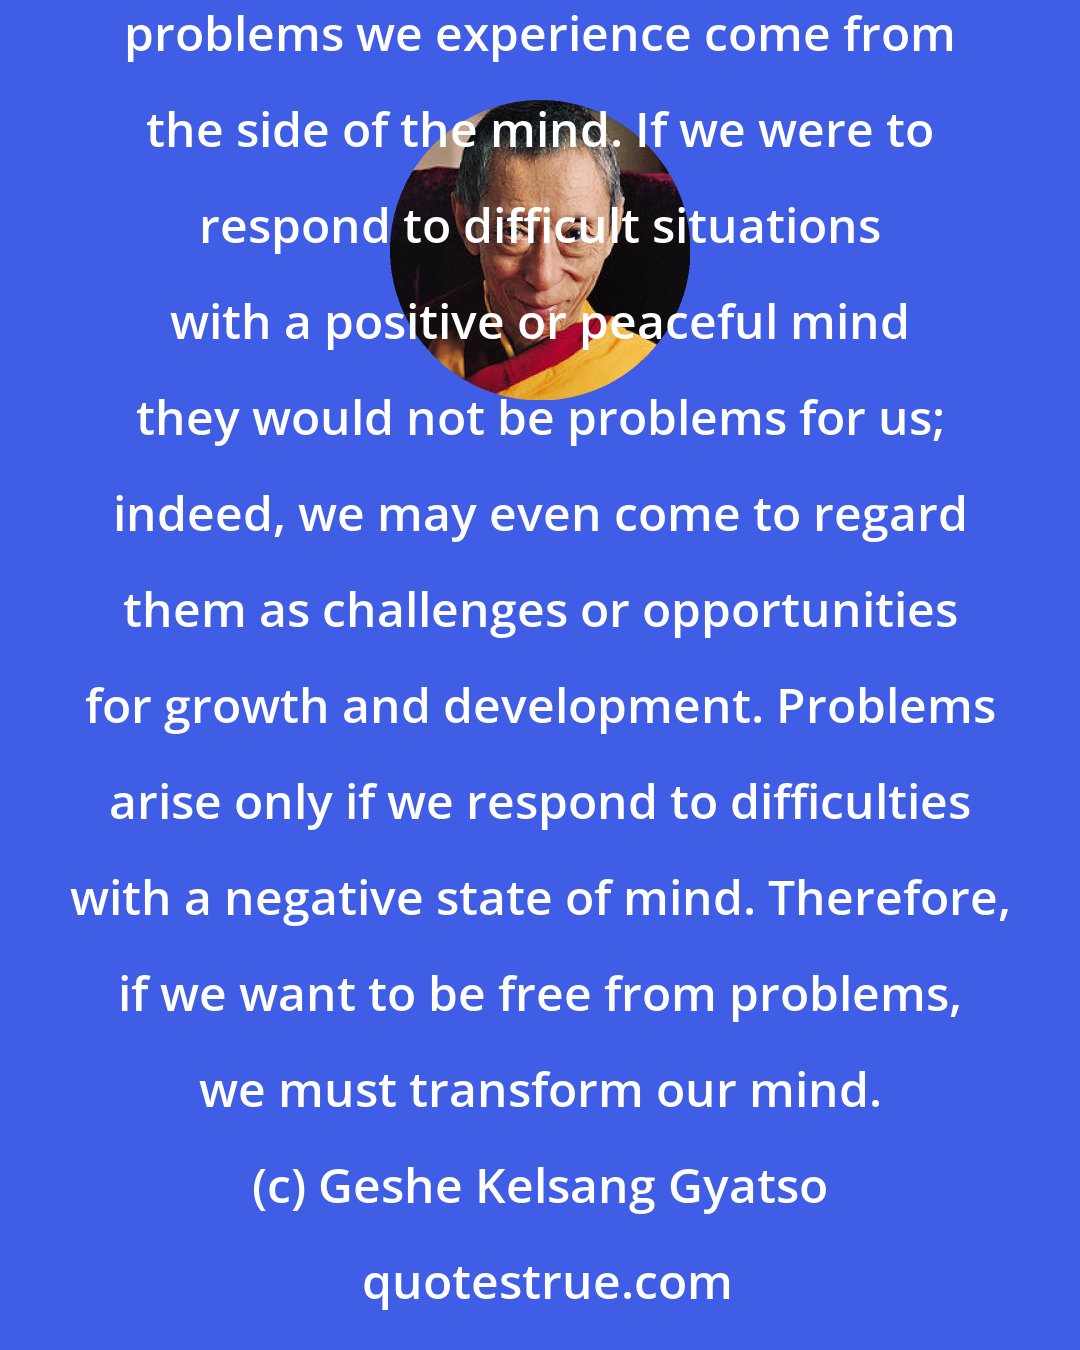 Geshe Kelsang Gyatso: When things go wrong in our life and we encounter difficult situations, we tend to regard the situation itself as our problem, but in reality whatever problems we experience come from the side of the mind. If we were to respond to difficult situations with a positive or peaceful mind they would not be problems for us; indeed, we may even come to regard them as challenges or opportunities for growth and development. Problems arise only if we respond to difficulties with a negative state of mind. Therefore, if we want to be free from problems, we must transform our mind.